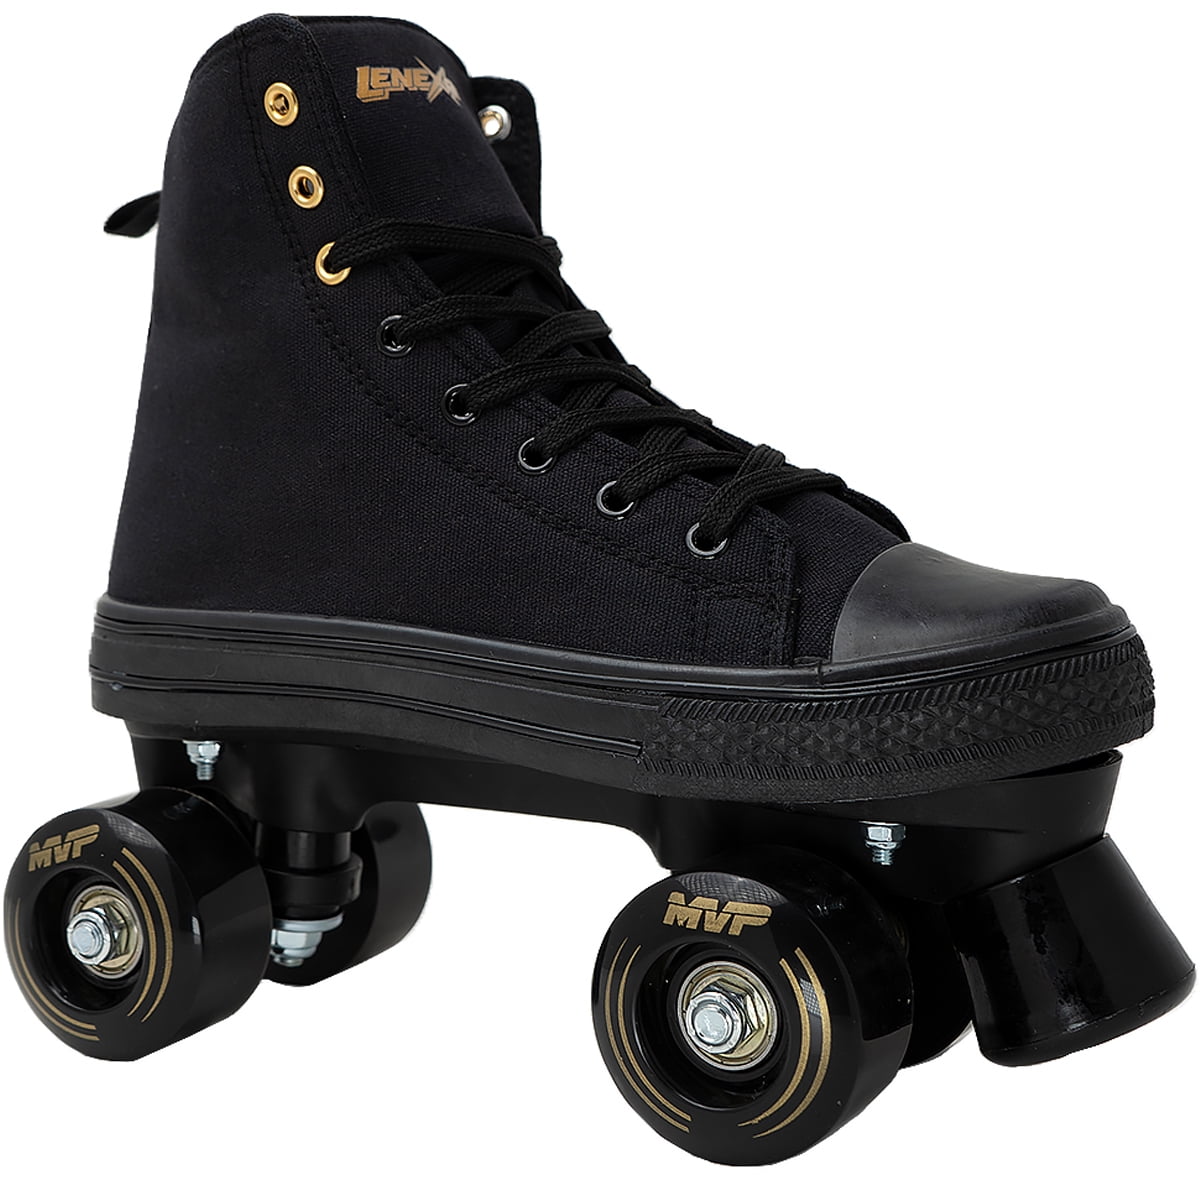 Unisex Roller Skates Artificial Fur Classic High-top Skates Shoes Double-Row Four Shiny Wheels for Womens Mens Boys and Girls